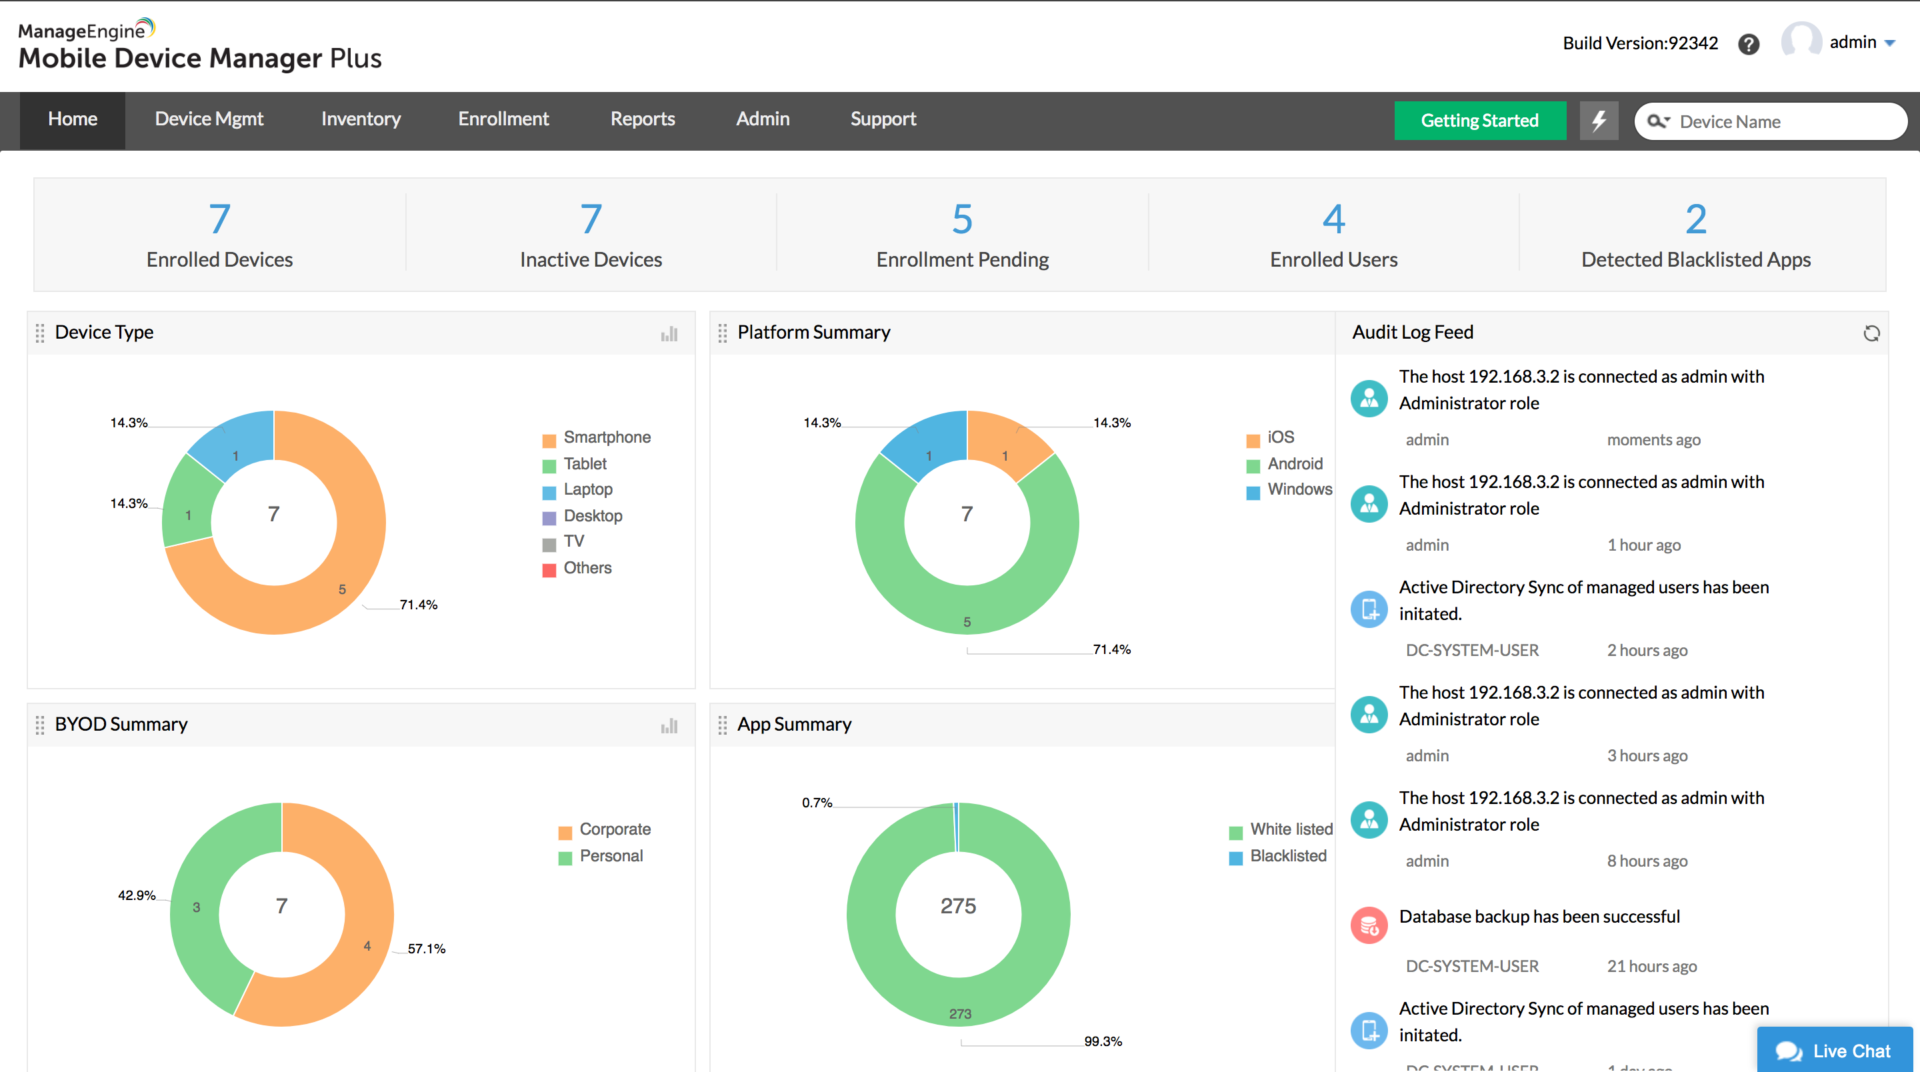 Manage Engine Mobile Device Manager Dashboard